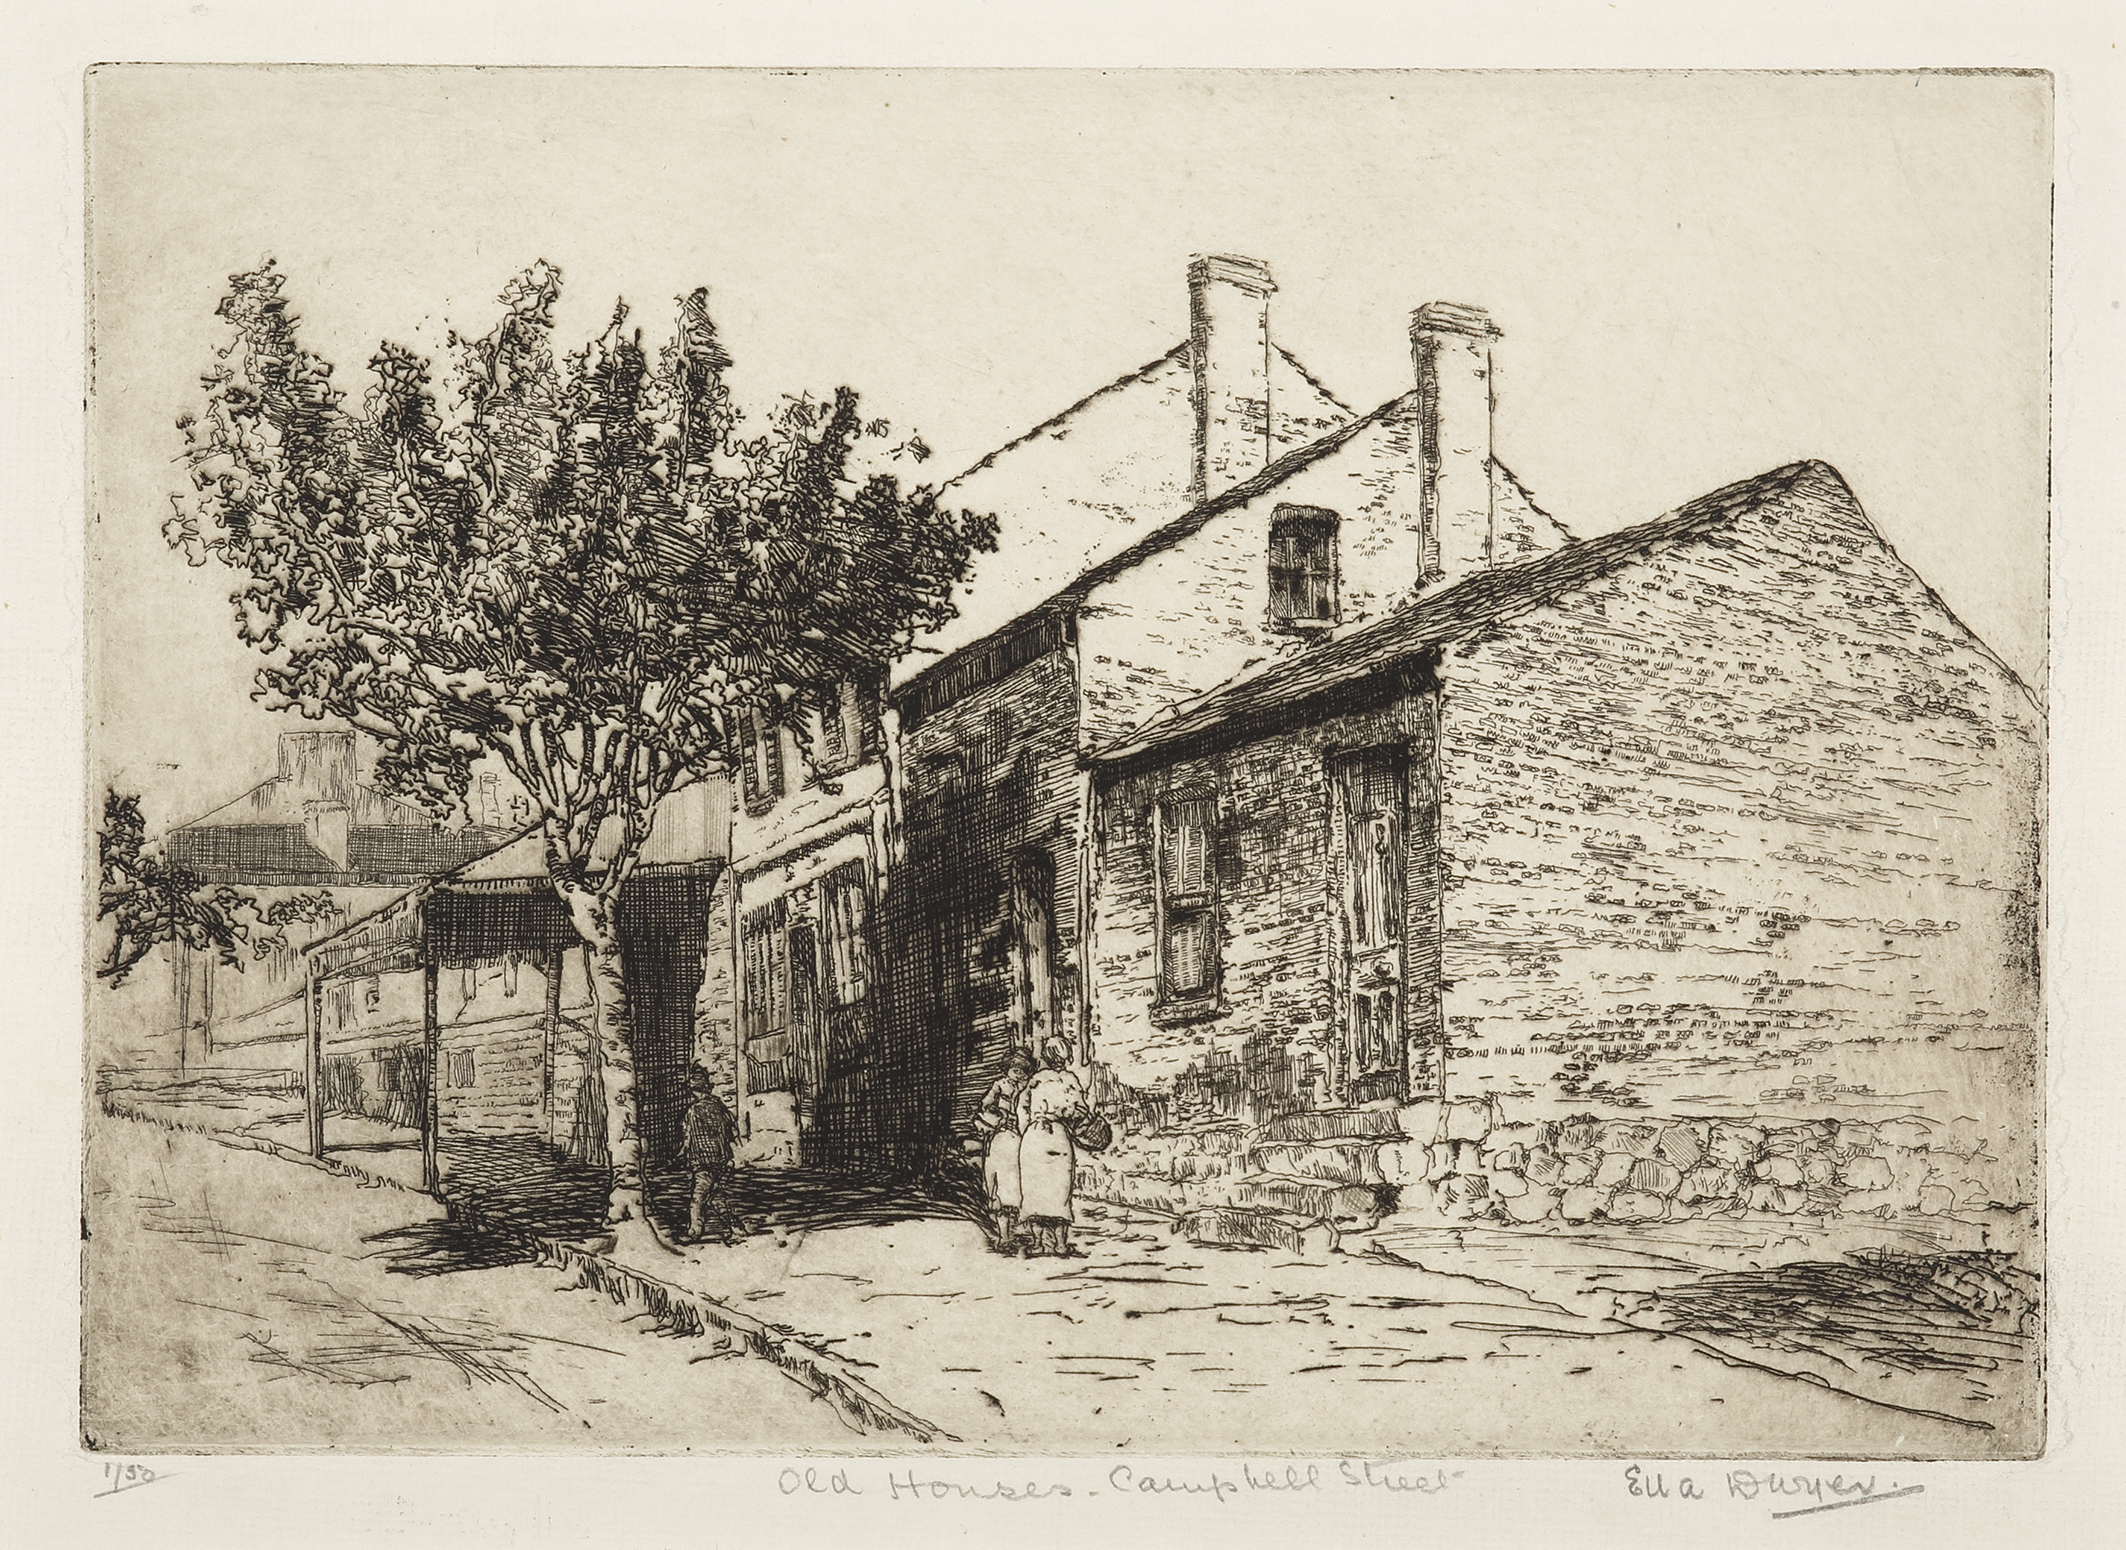 Old Houses, Campbell Street. - Vintage Print from 1929